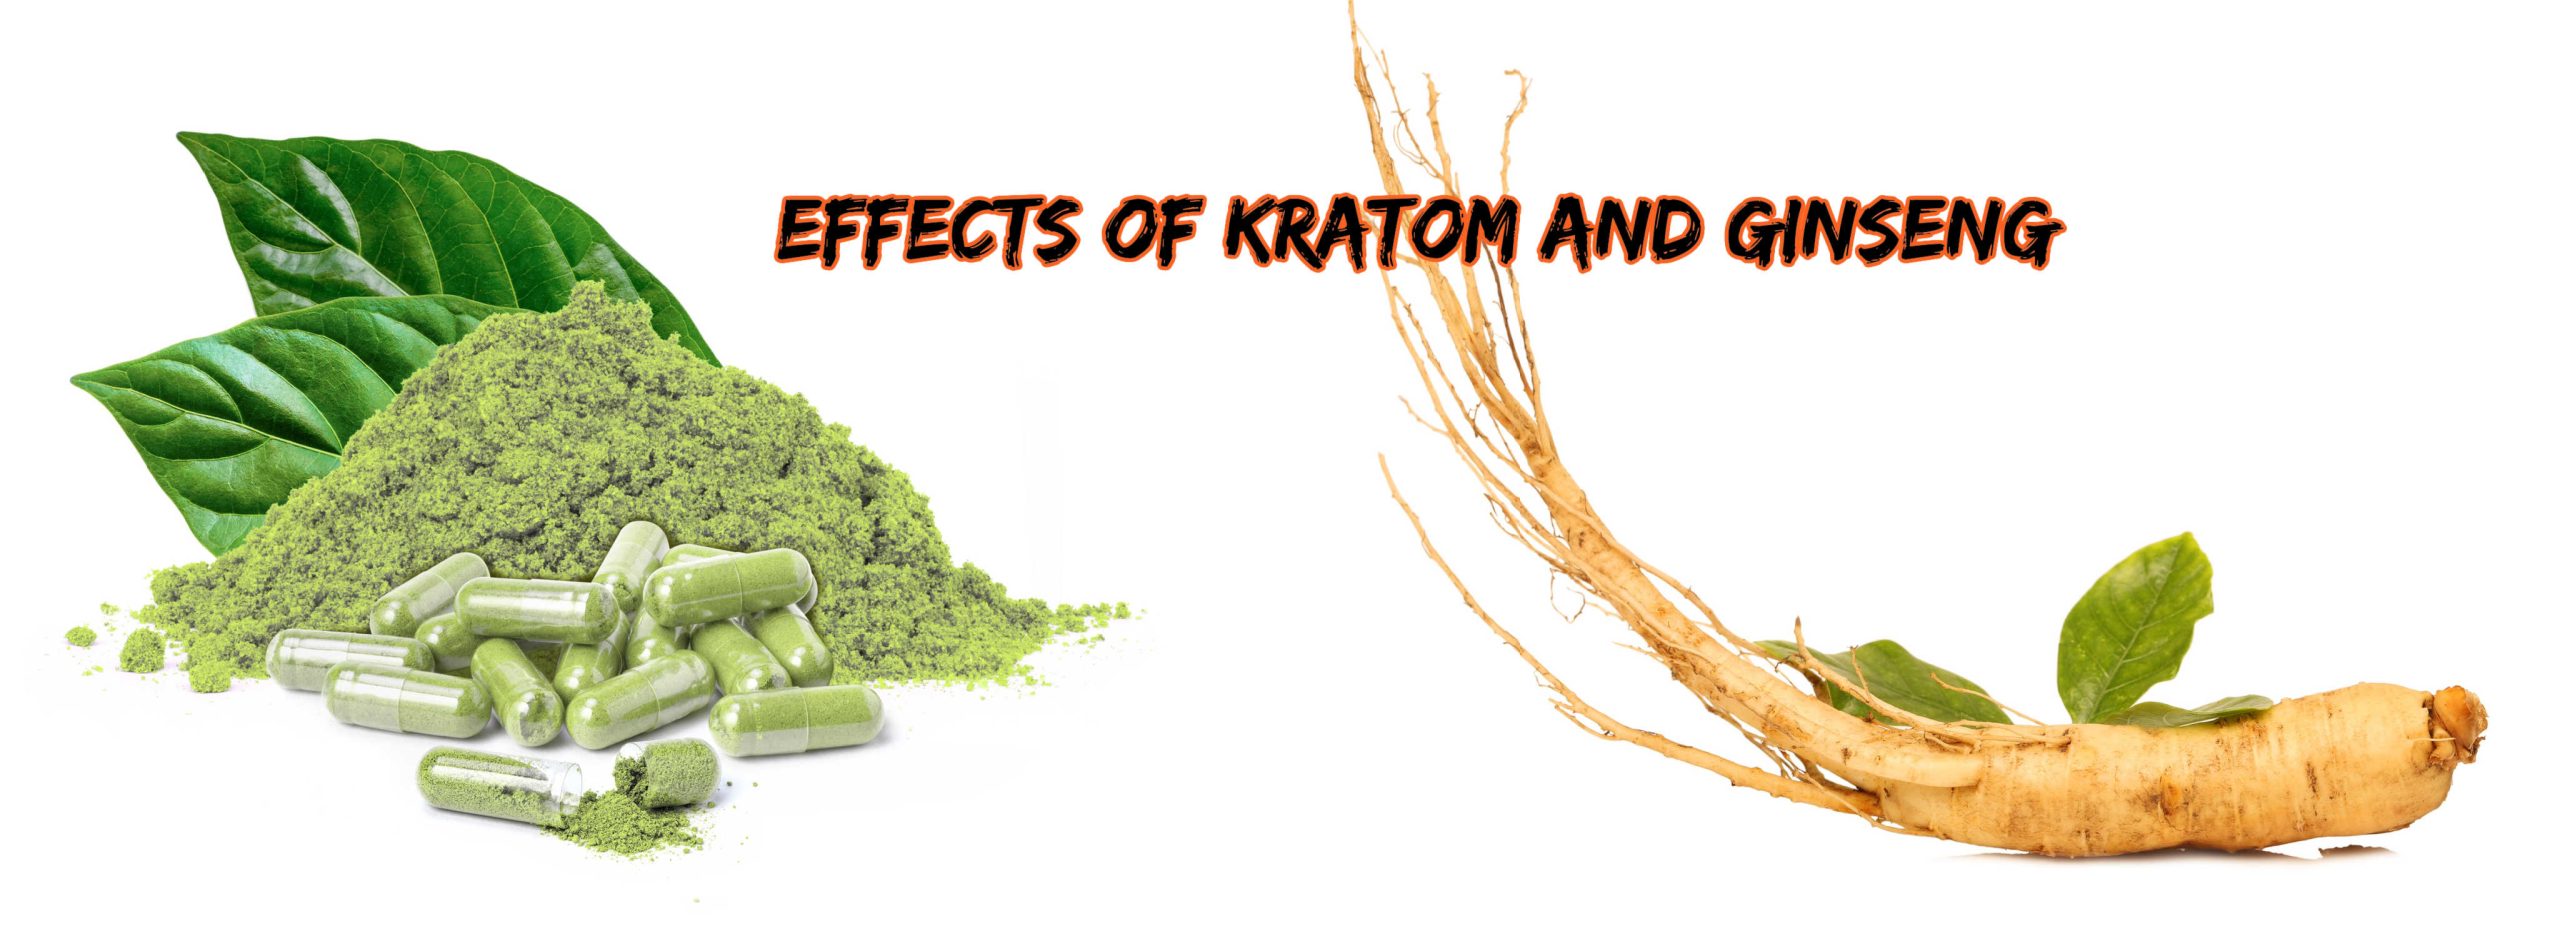 image of kratom and ginseng effects